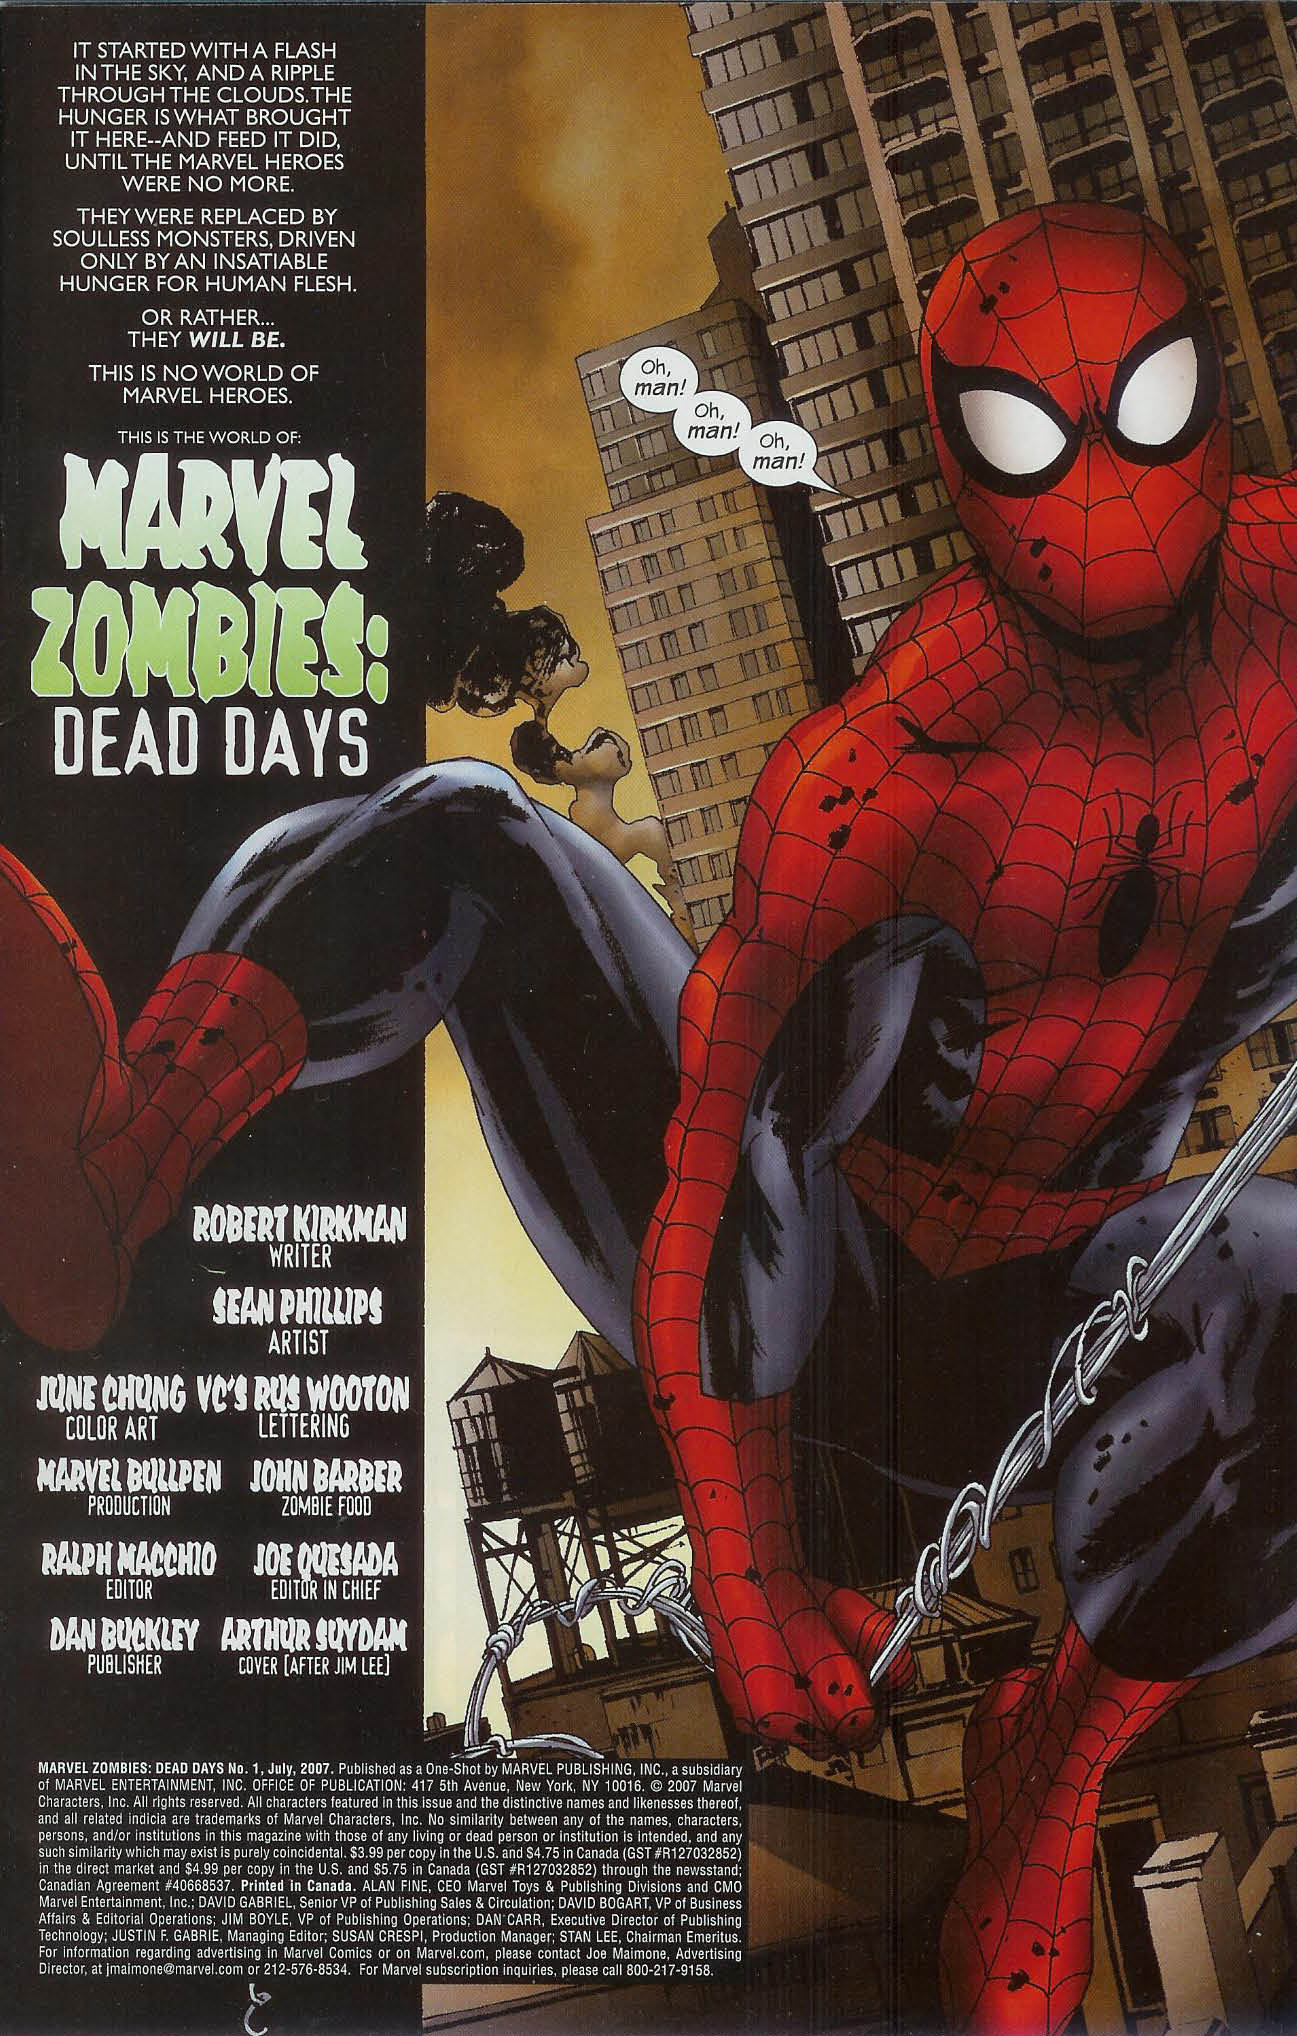 Marvel Zombies: Dead Days #5